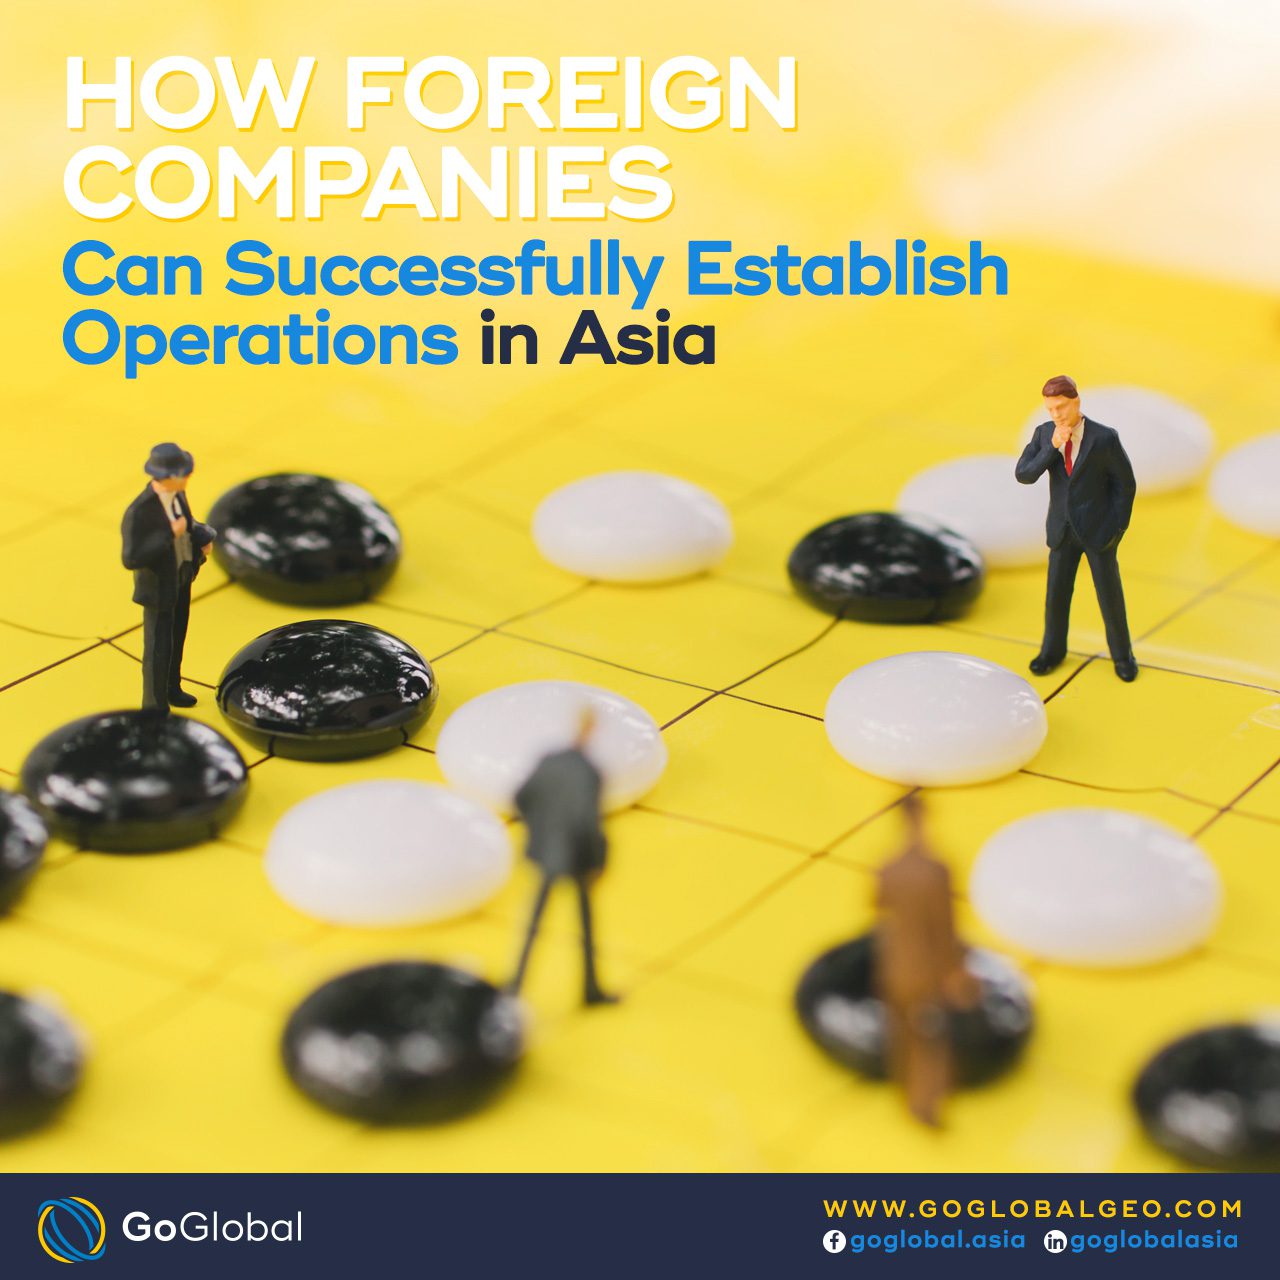 How foreign companies can successfully establish operations in Asia